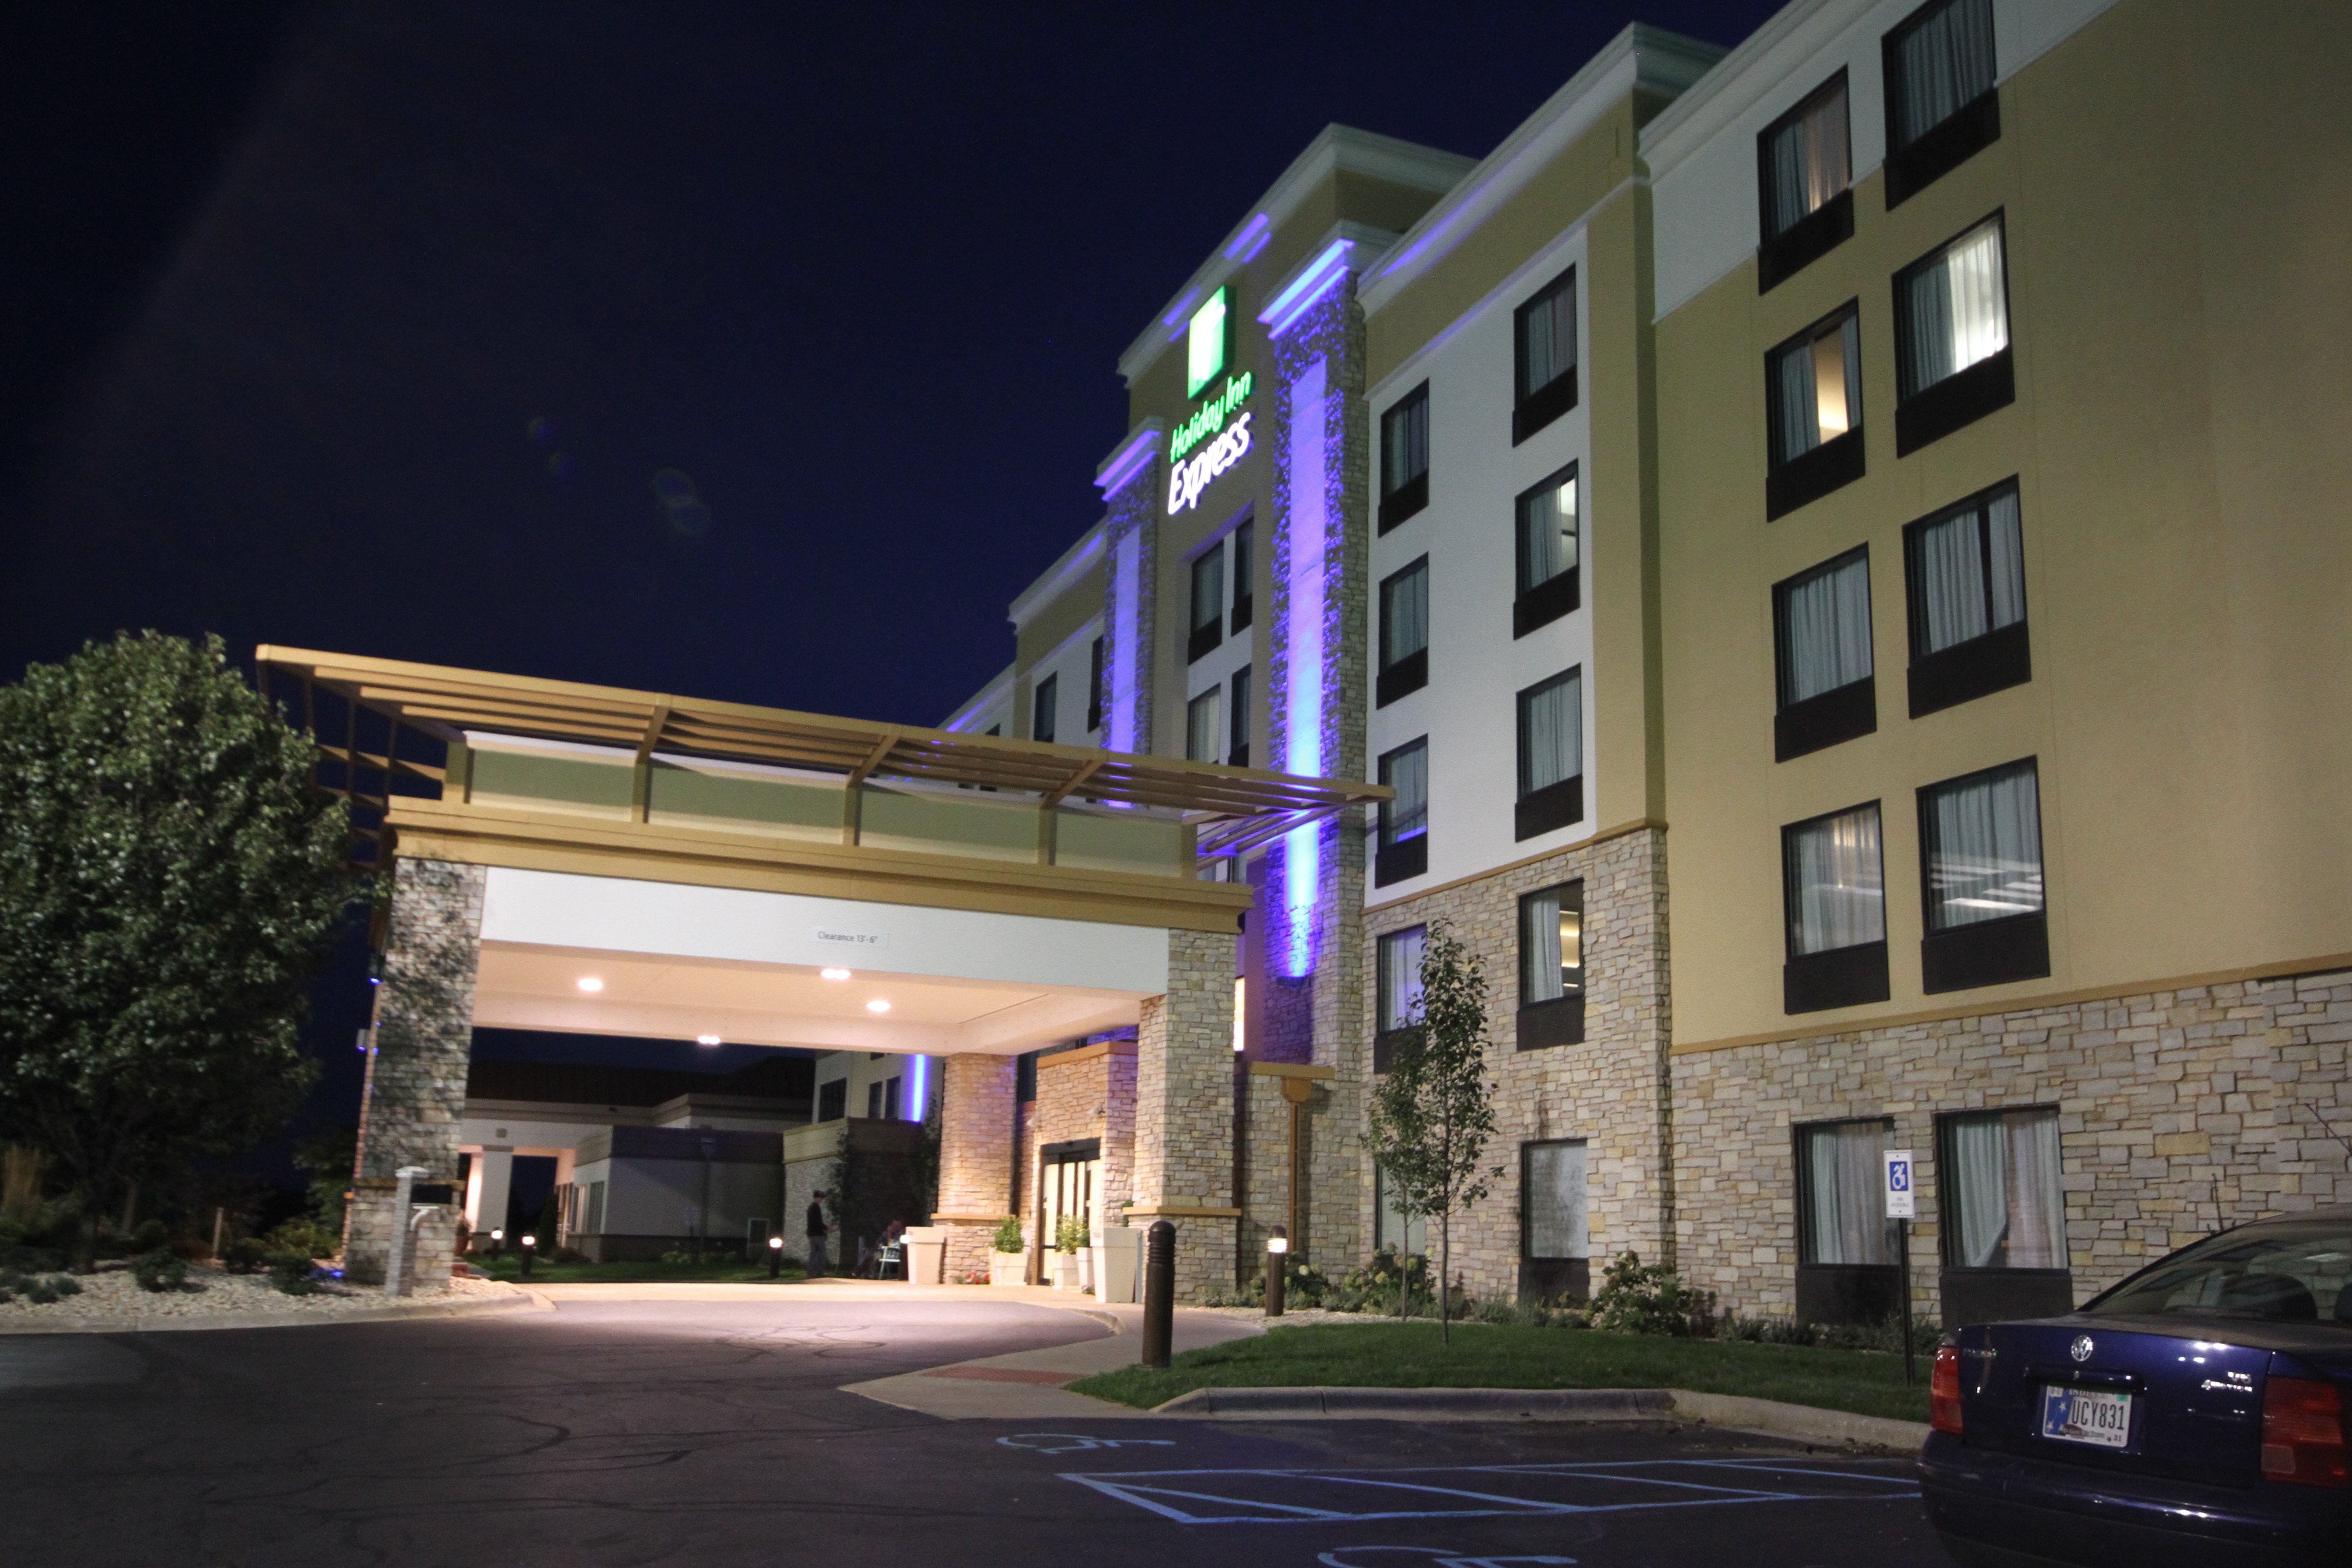 Welcome to the Holiday Inn Express Janesville